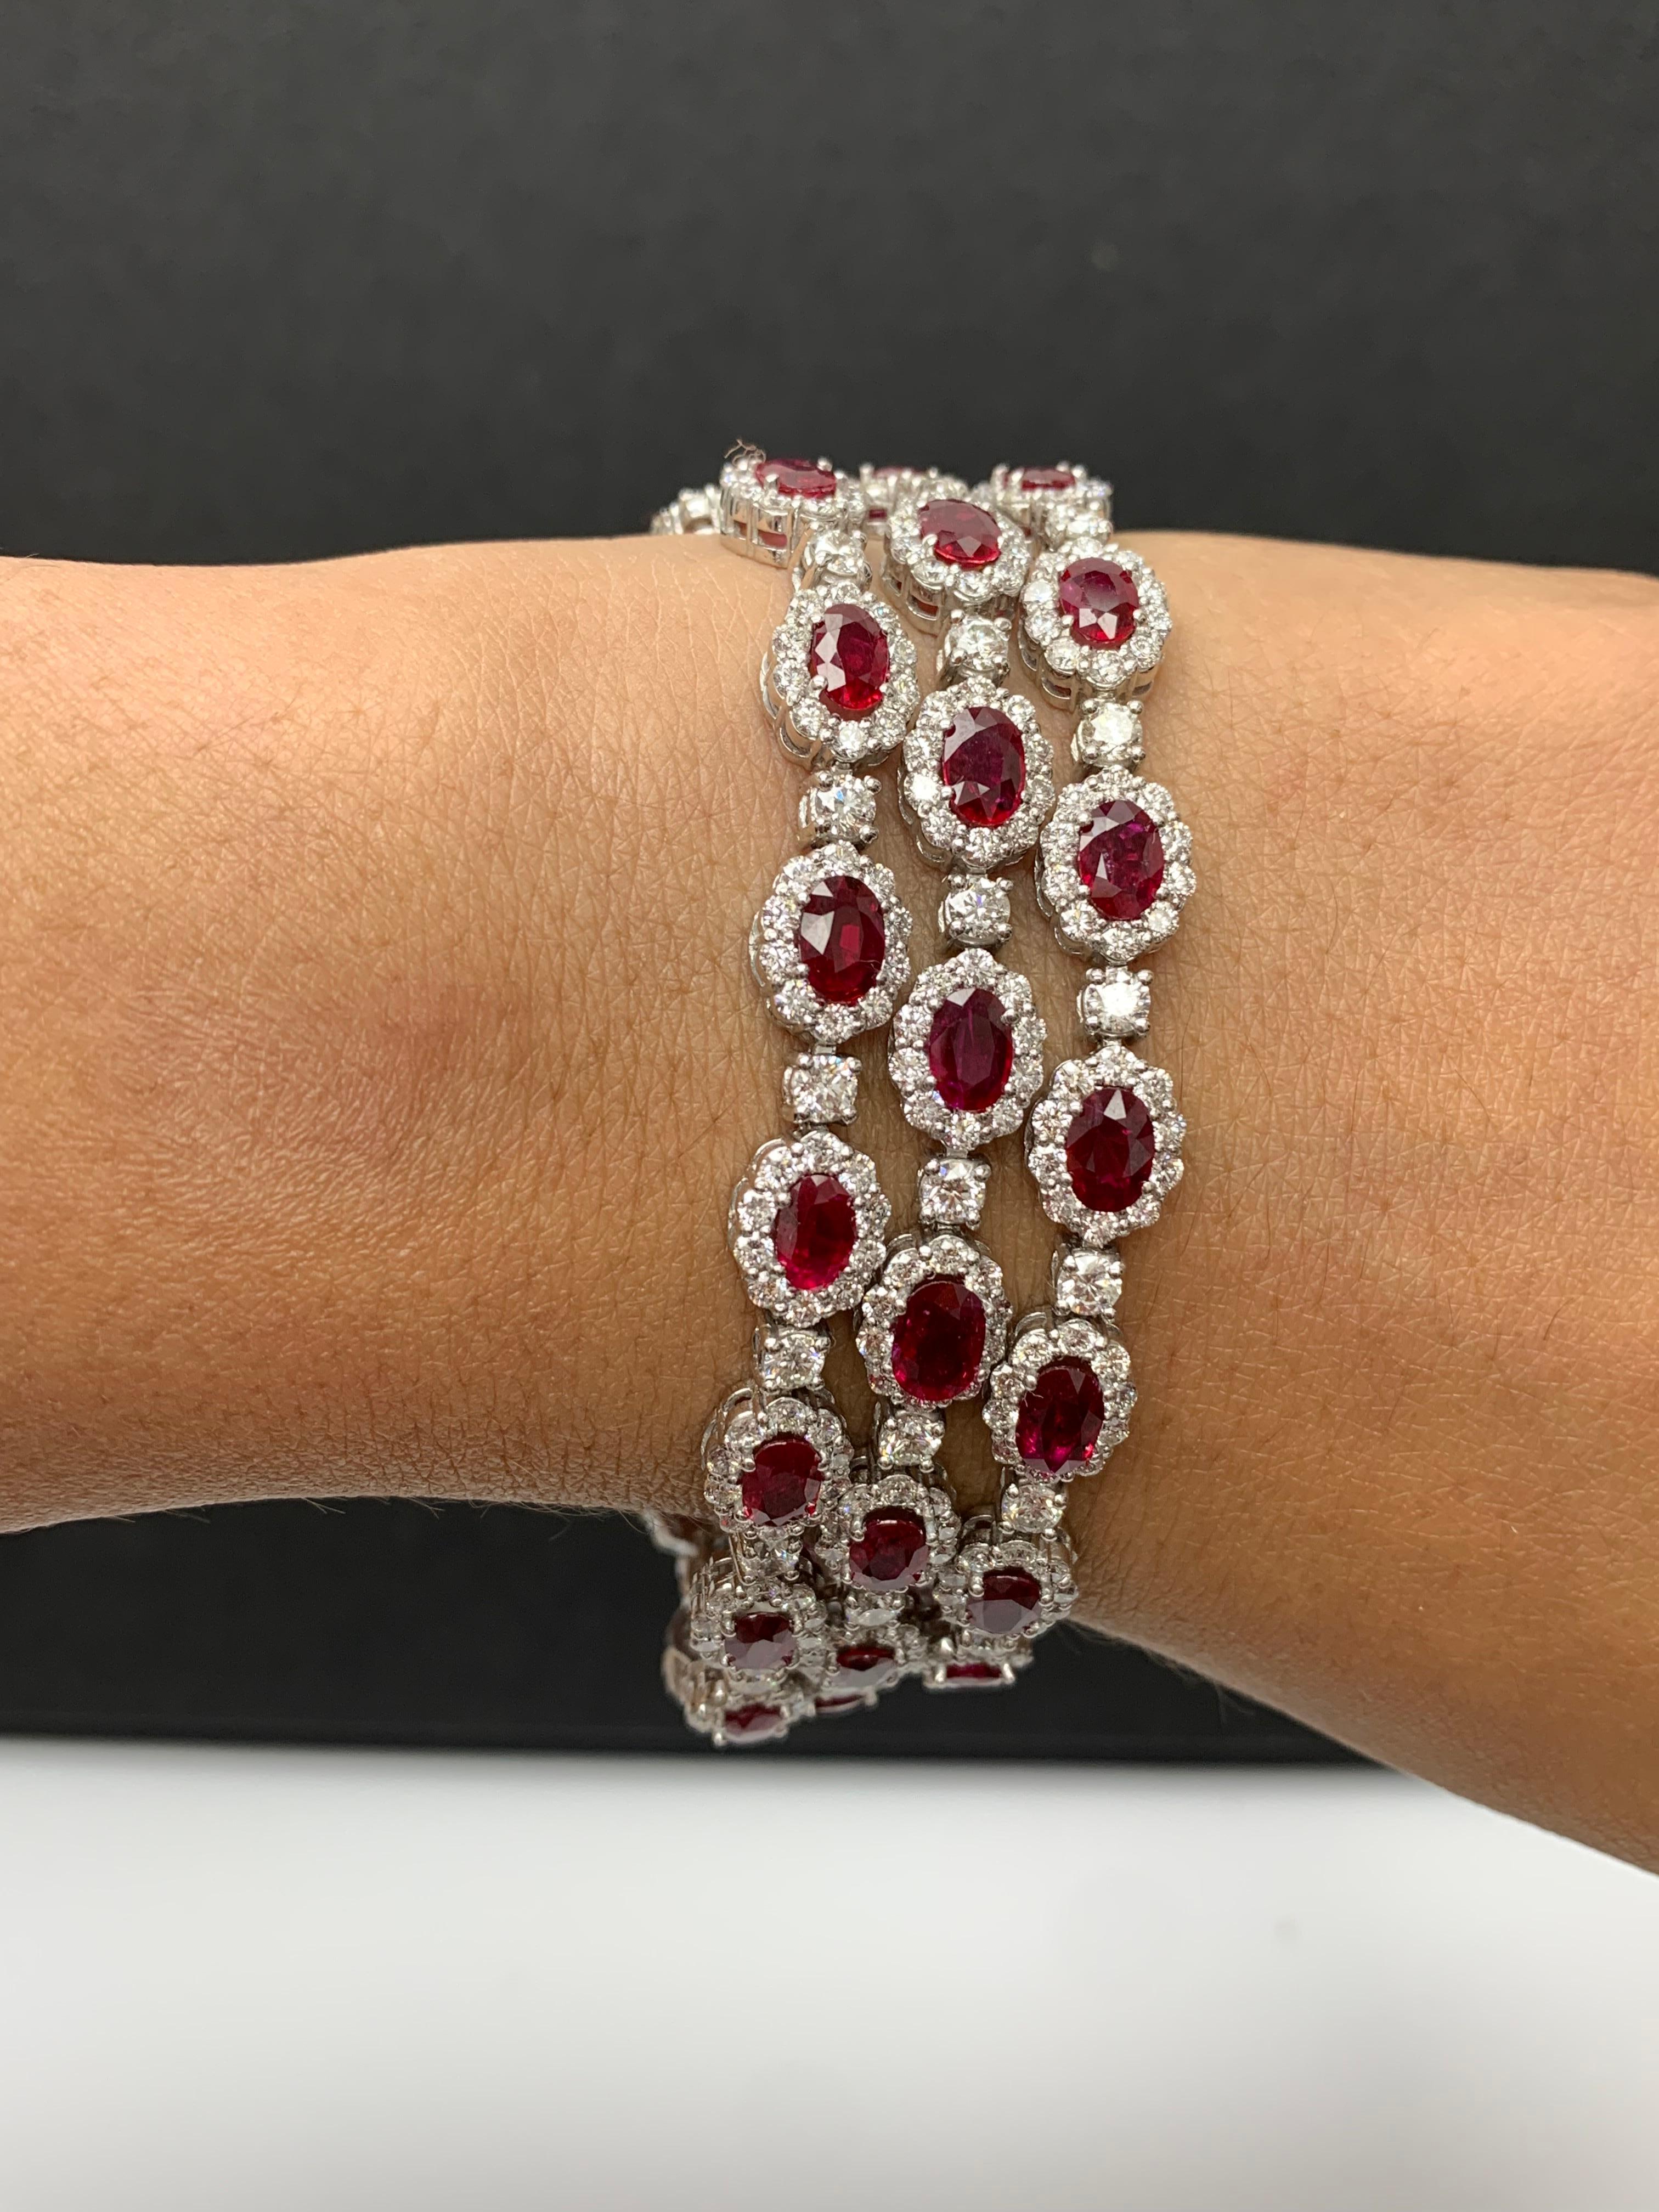 Modern 18.01 Carat Oval Cut Ruby and Diamond 3 Row Bracelet in 14K White Gold For Sale